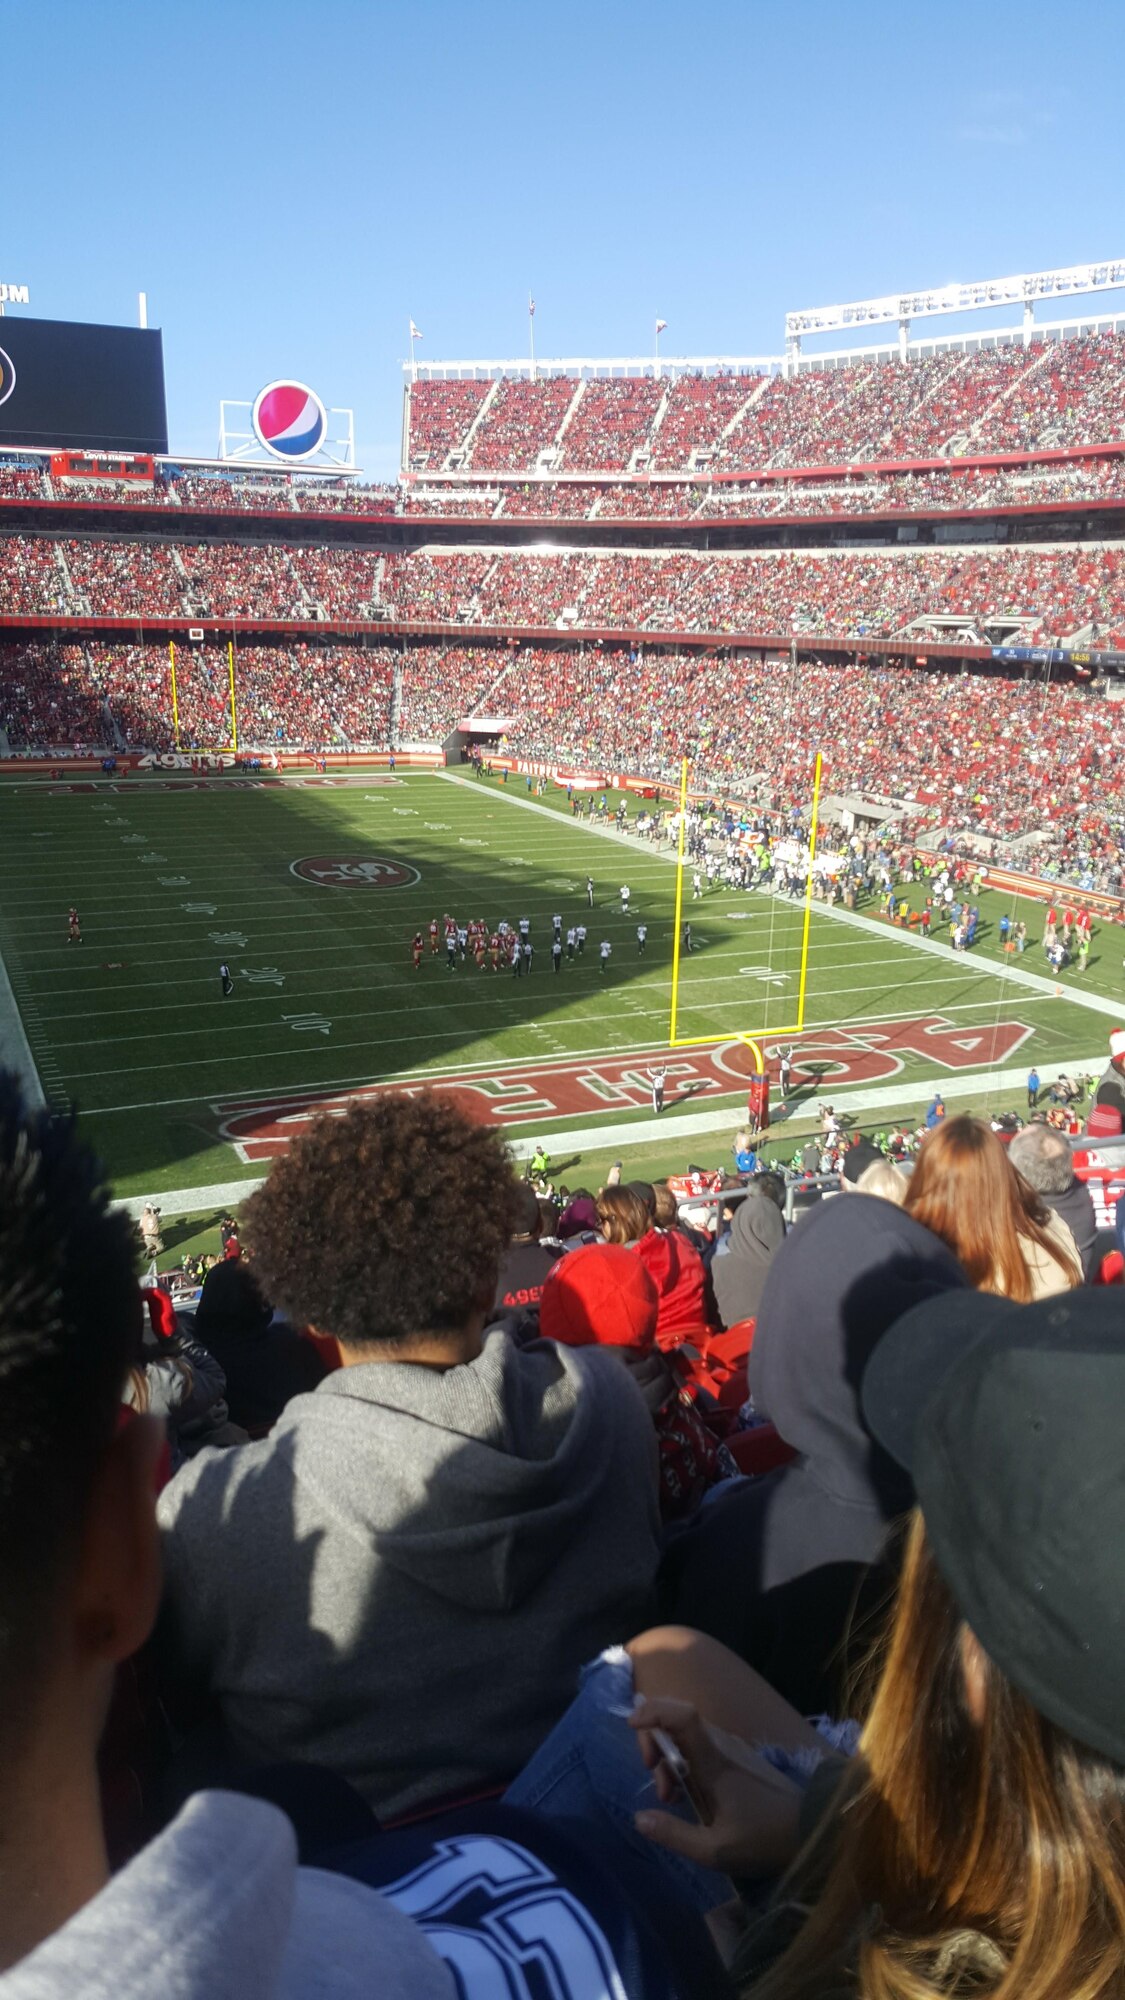 Courtesy photo by Airman Breanna Crisp of the 152nd Maintenance Squadron -- taken while at San Francisco 49ers game on Jan. 1, 2017.